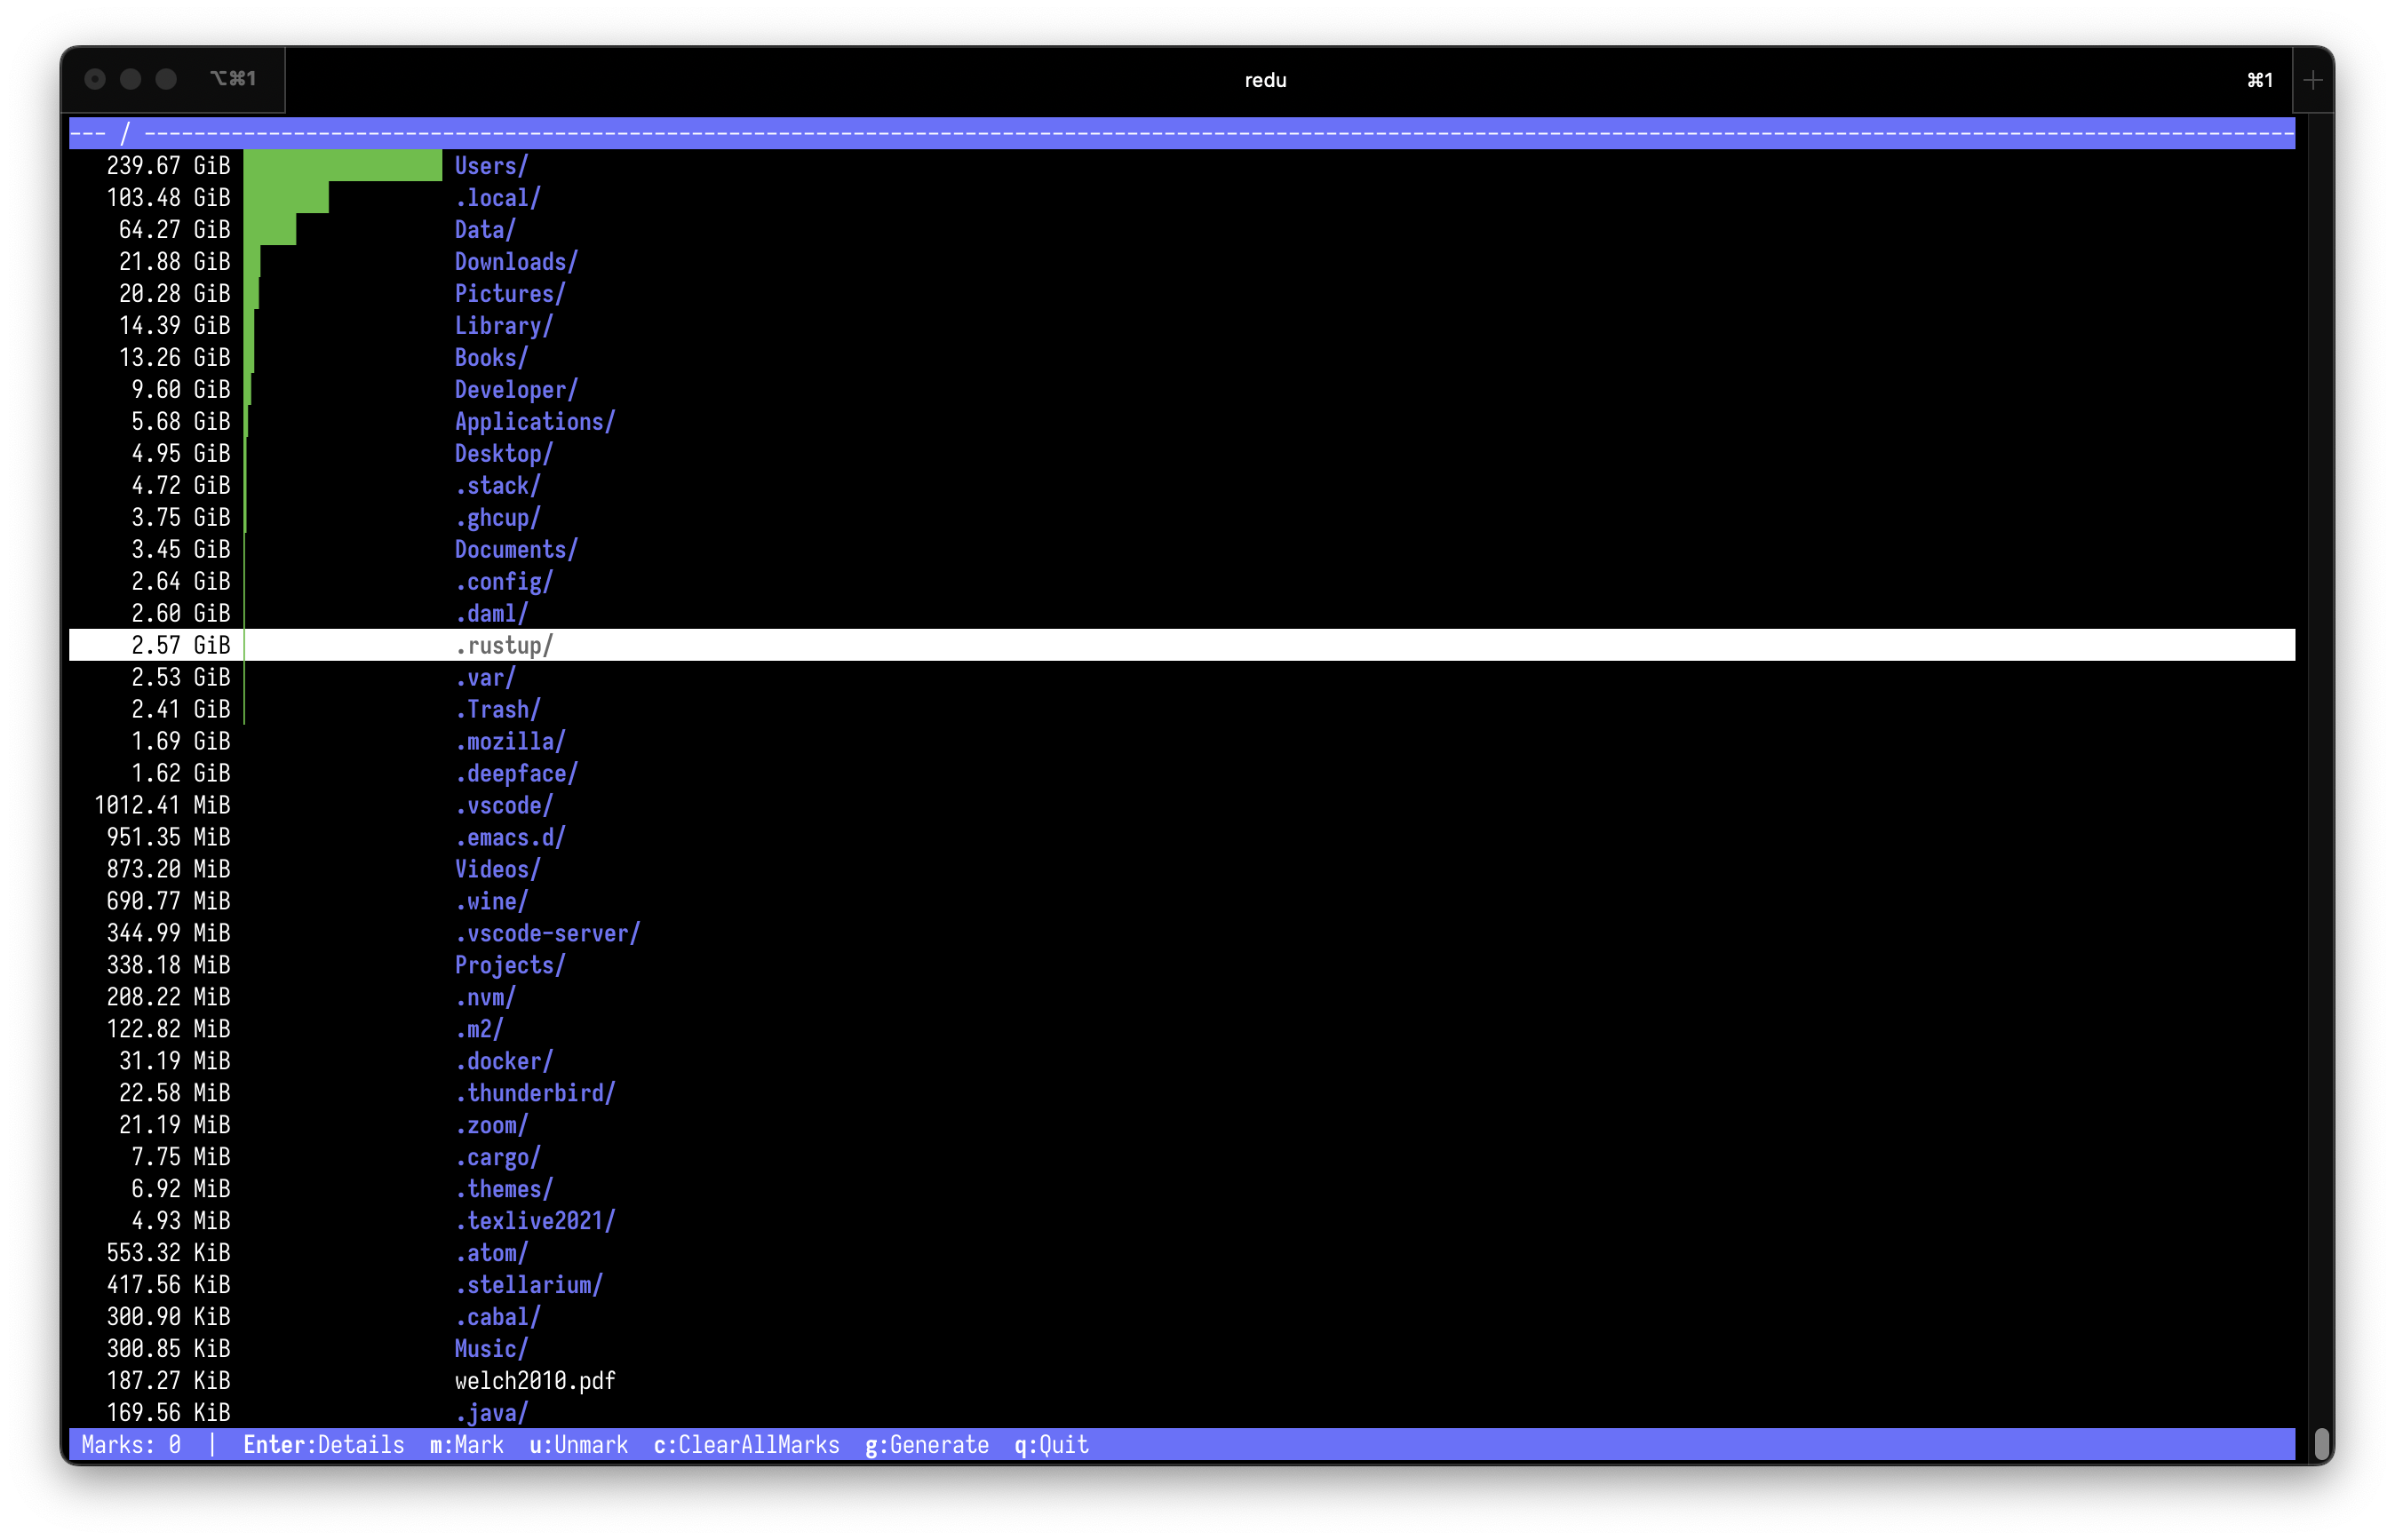 Screenshot of redu showing the contents of a repo